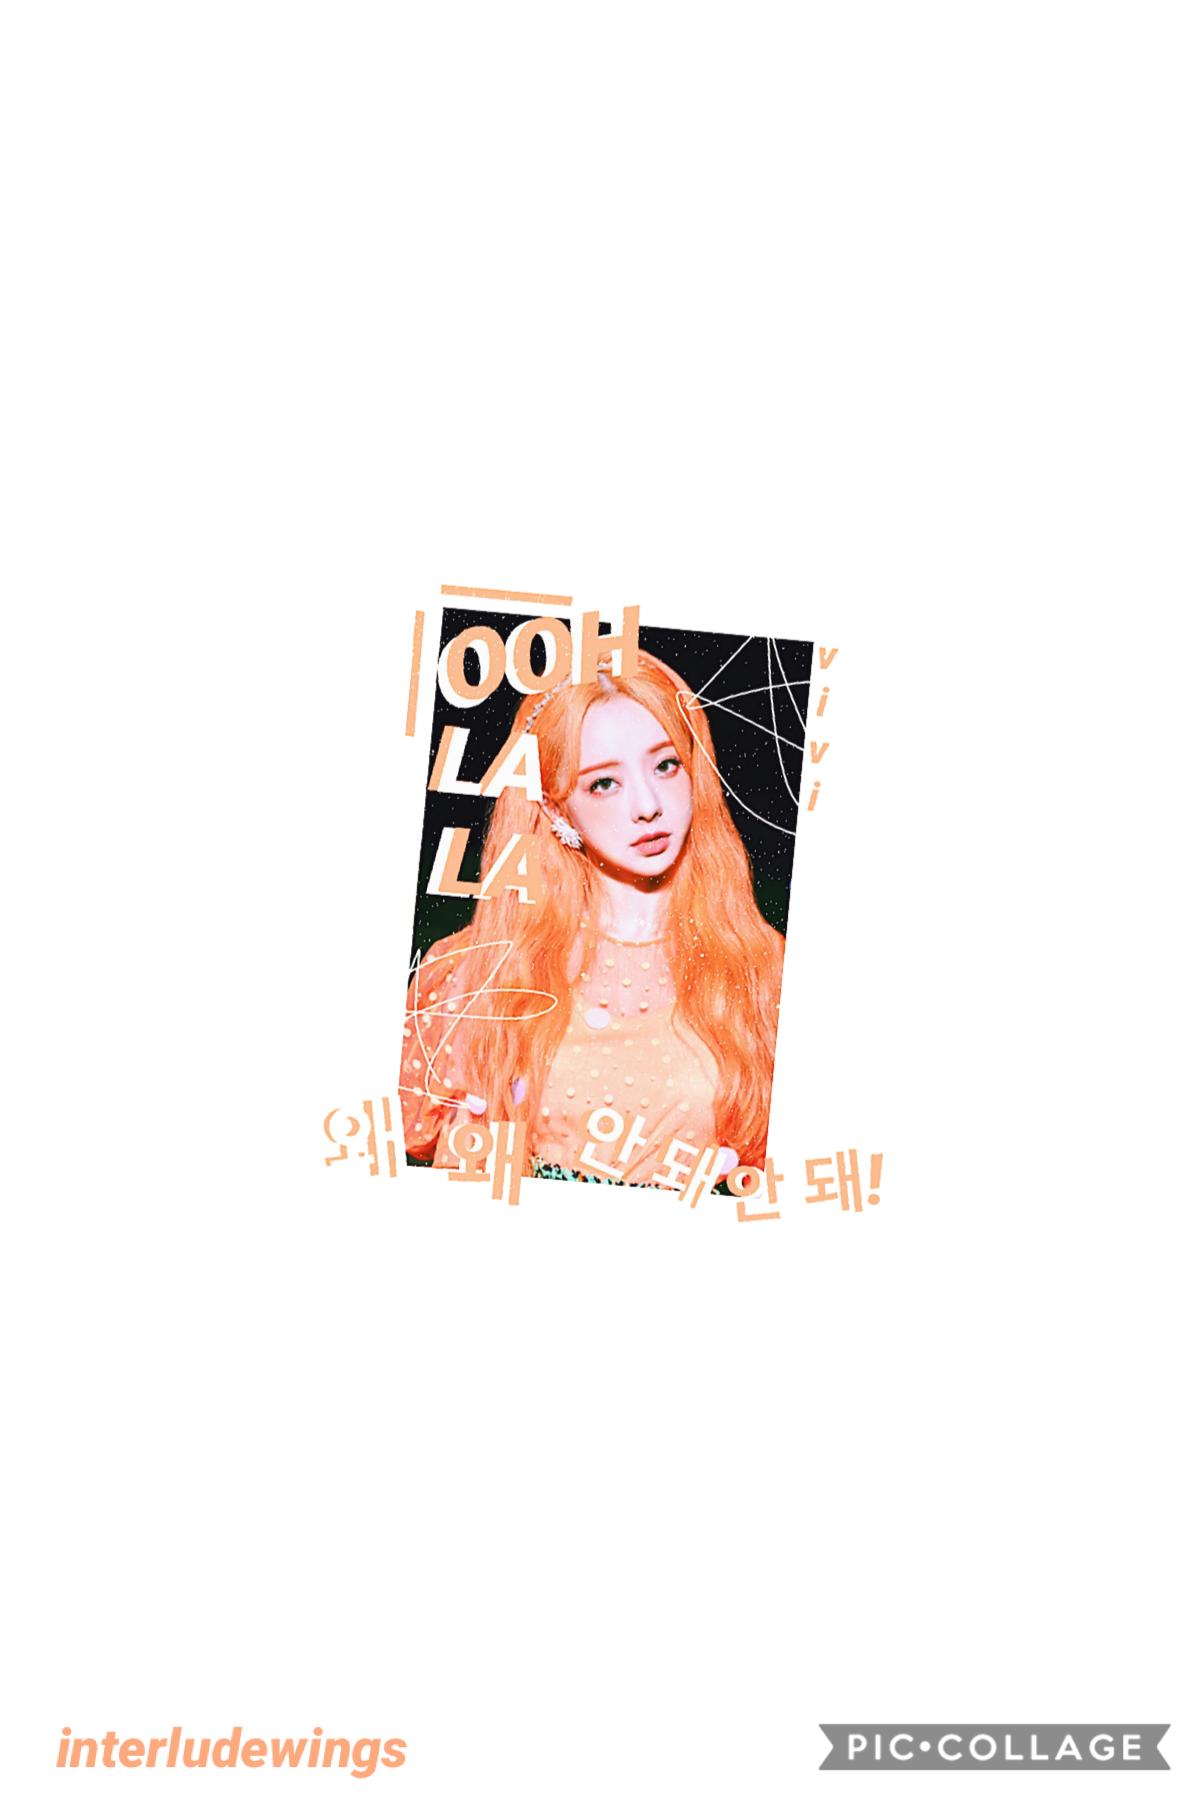 🍊 open 🍊
vivi~loona 
i can’t believe i’m posting more than one time in a month lol school has really been taking a toll on me lately 🥴